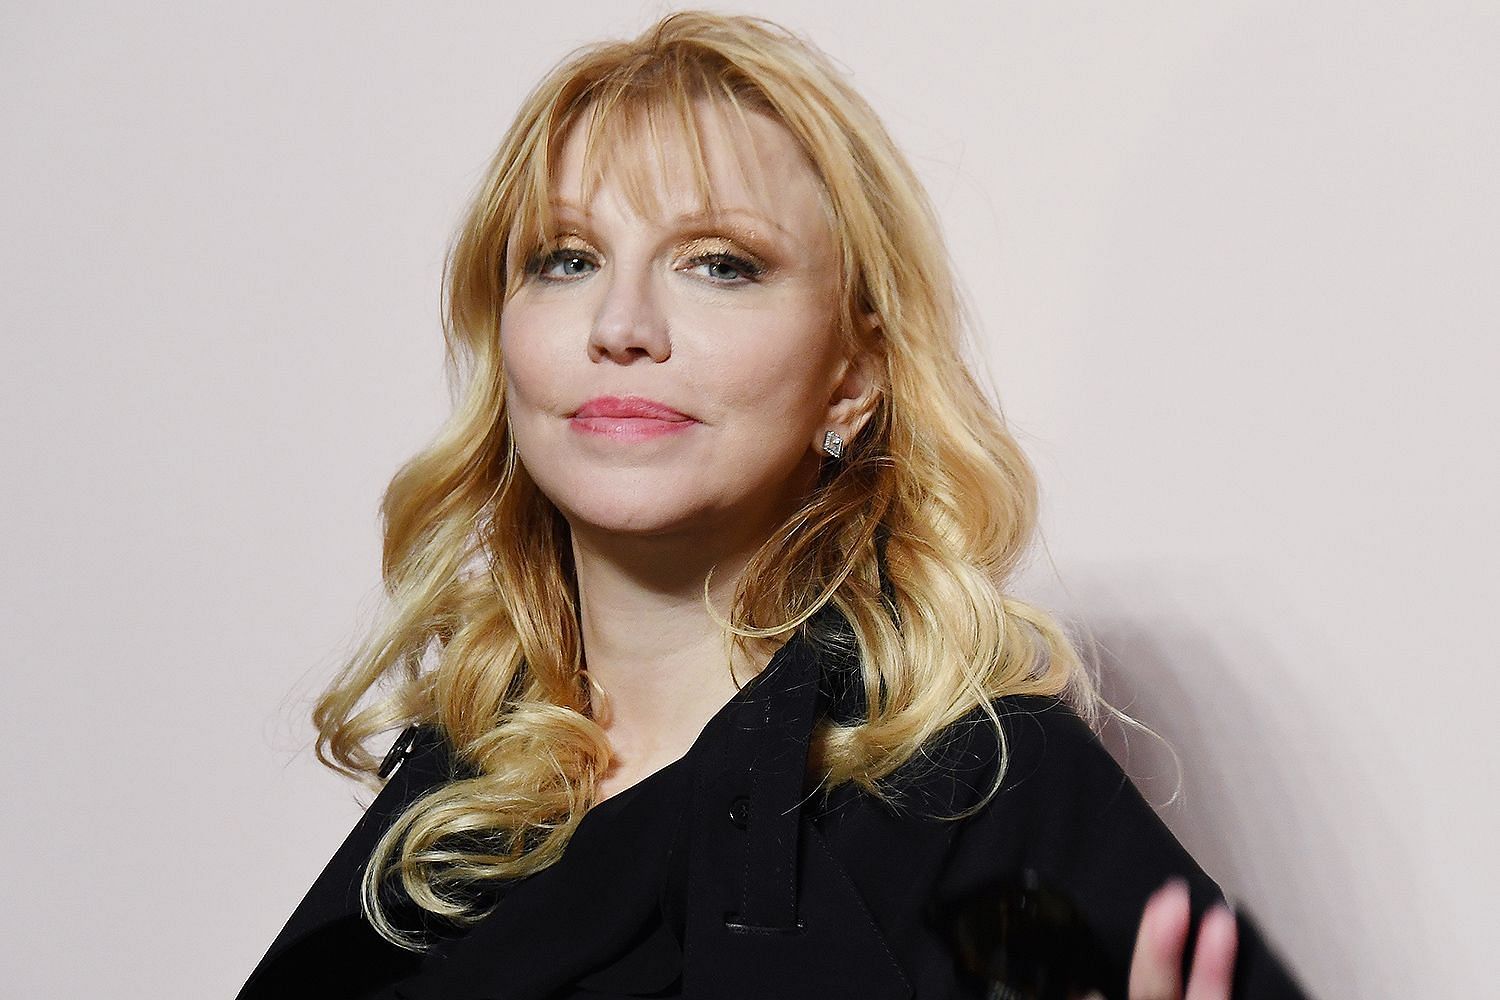 Courtney Love net worth 2021 Singer's fortune explored as she